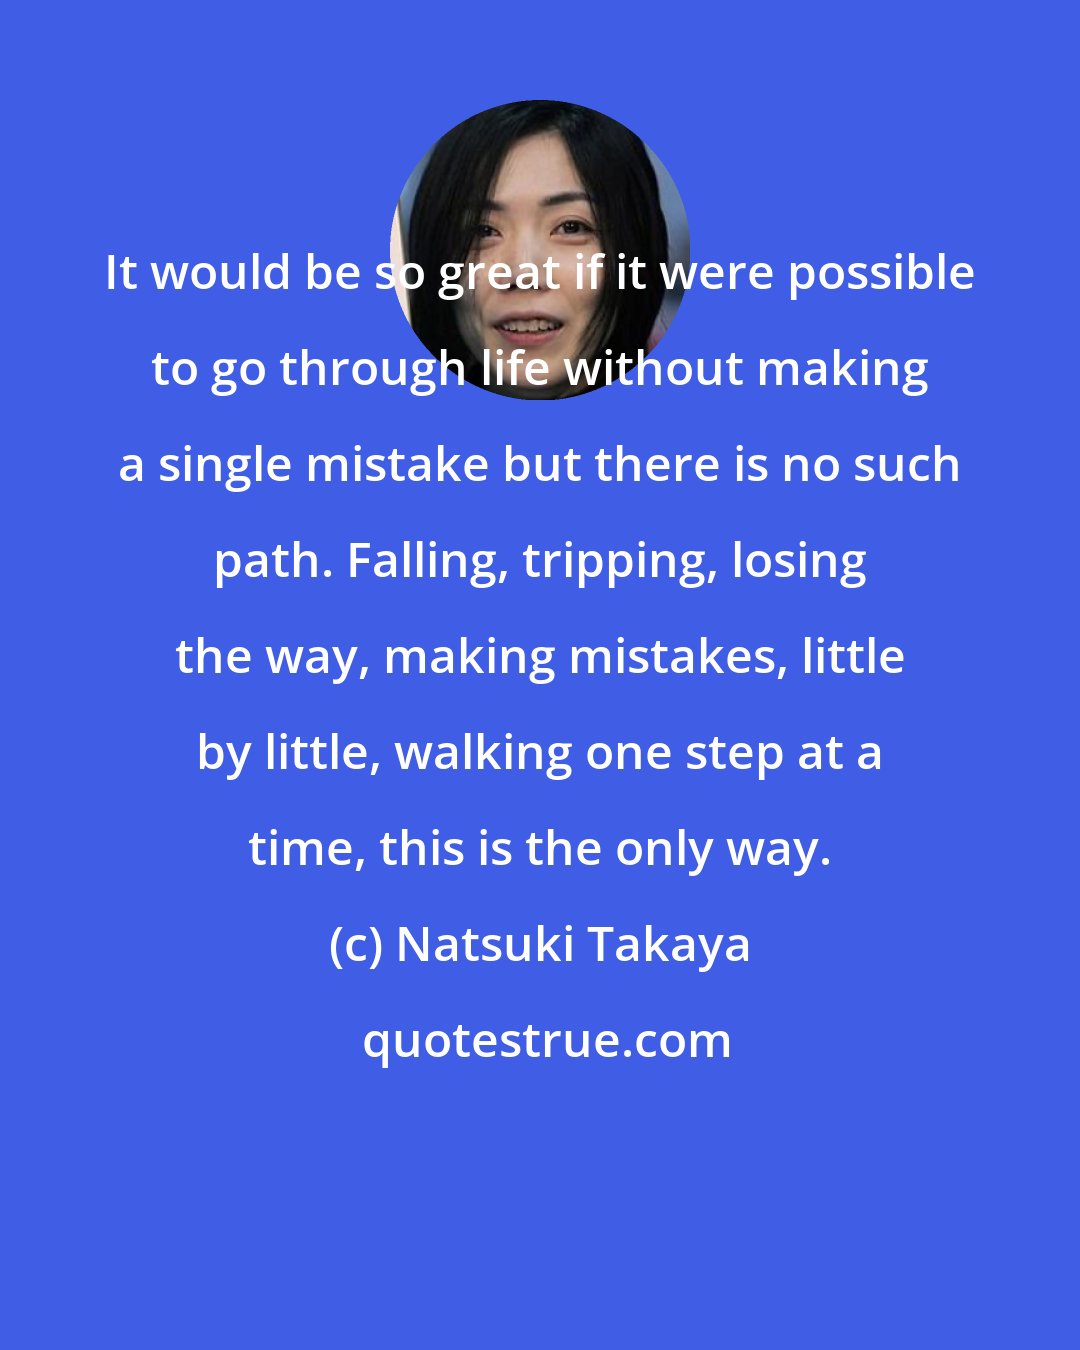 Natsuki Takaya: It would be so great if it were possible to go through life without making a single mistake but there is no such path. Falling, tripping, losing the way, making mistakes, little by little, walking one step at a time, this is the only way.